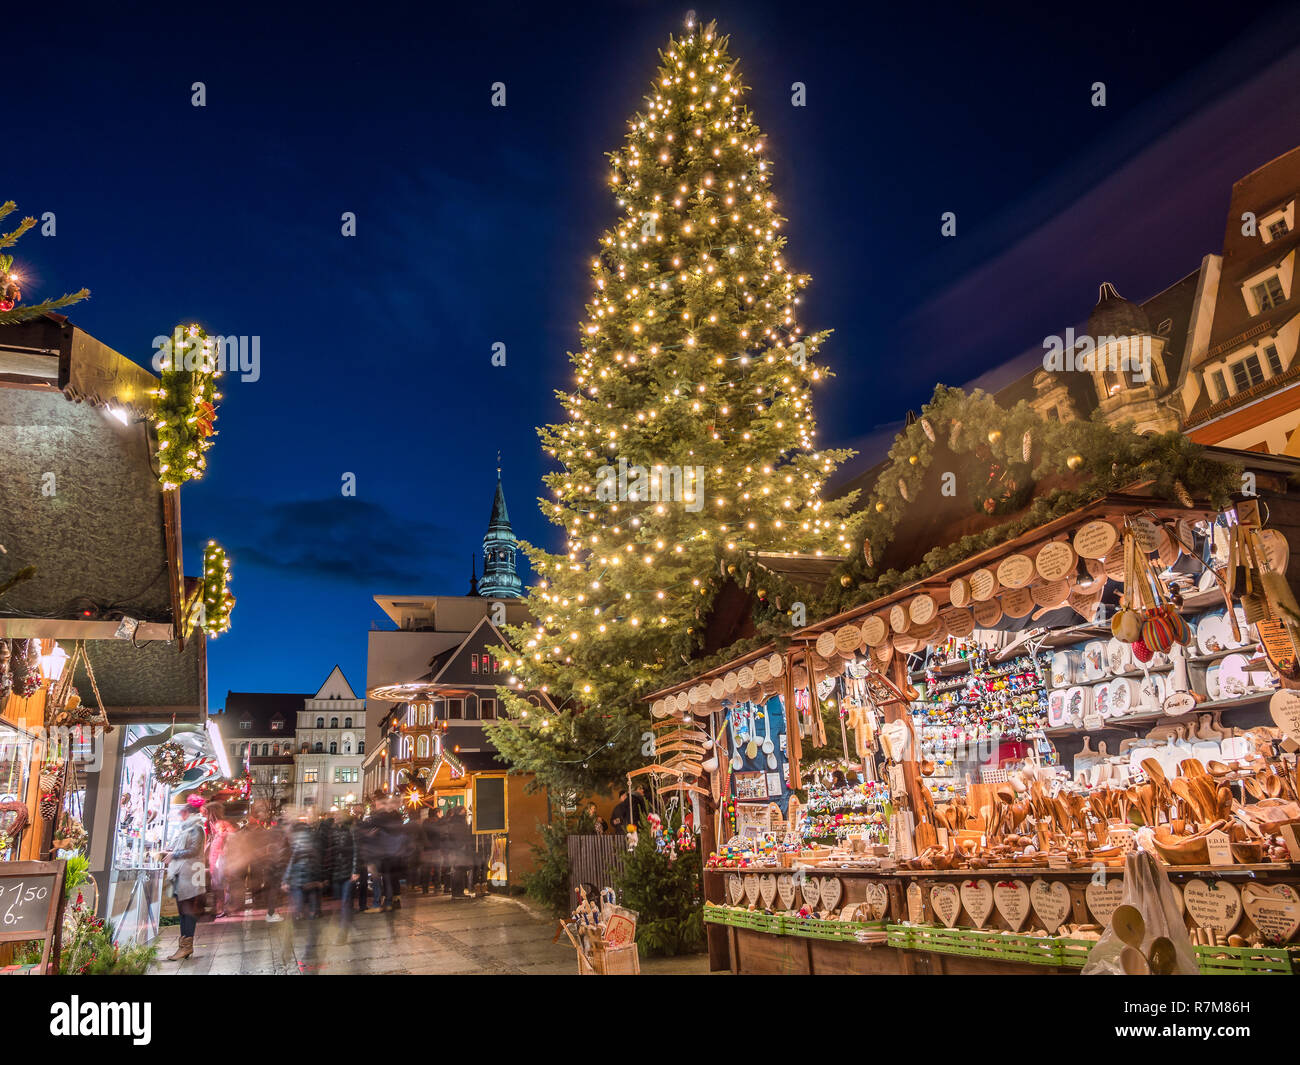 At the Christmas market in Zwickau Stock Photo